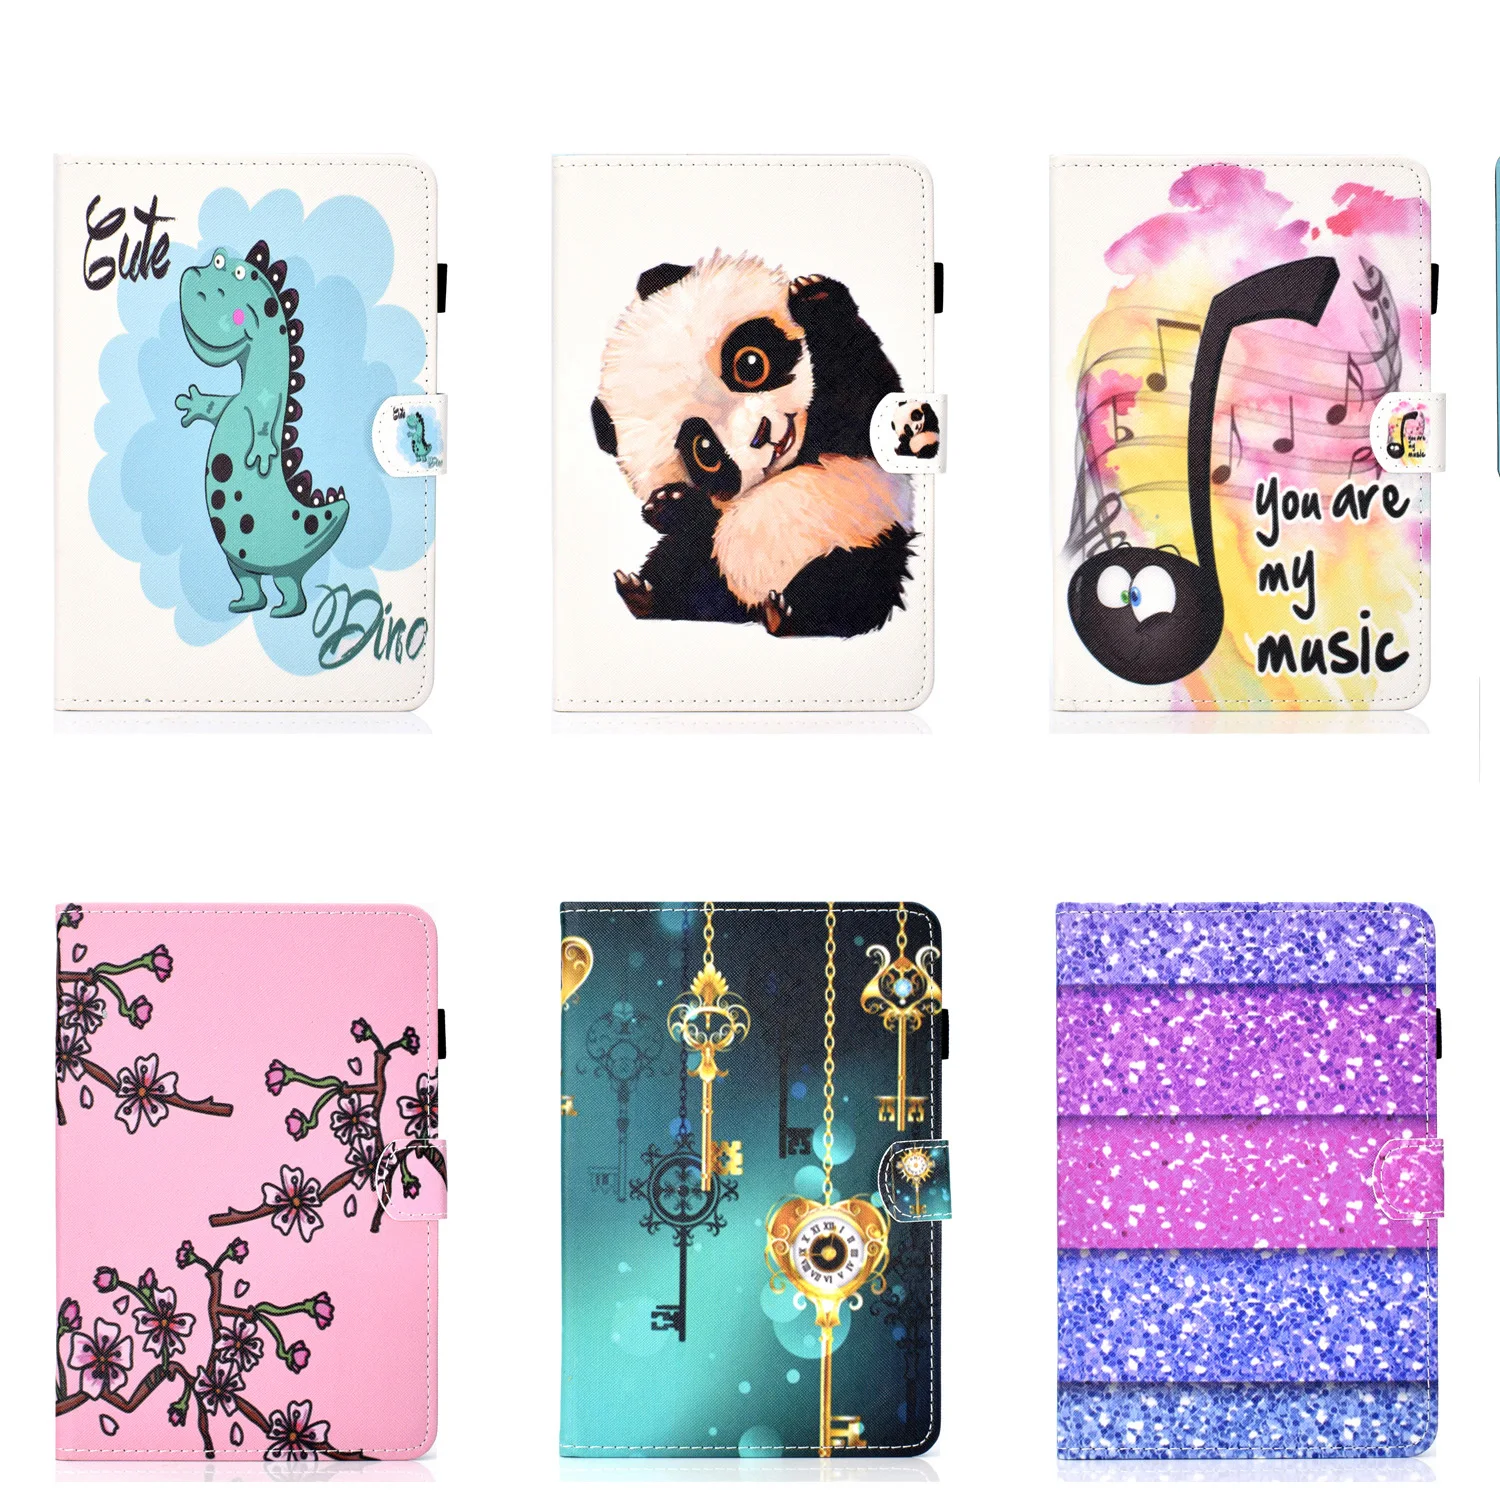 Cute Panda and Tree Design PU Leather Folio Stand Magnetic Flip Case Cover For iPad Mini 6 6th Gen 8.3 Inch 2021 A2567 A2568